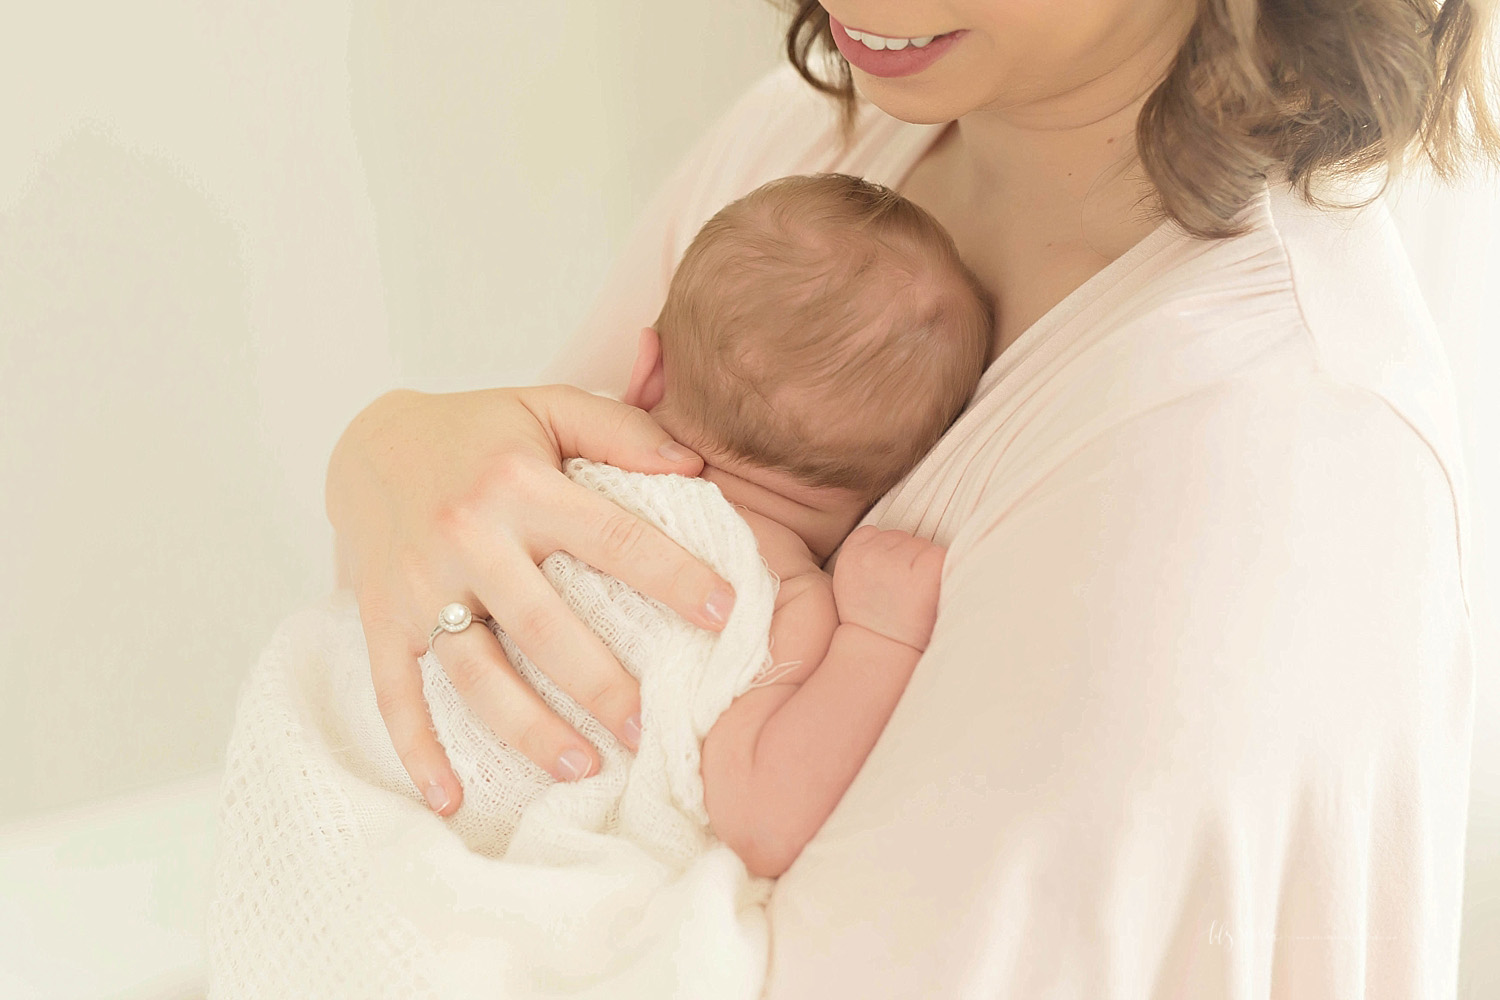  Image of a sleeping, newborn, baby boy, with his mother's hand on his back, while she smiles down at at him&nbsp; 